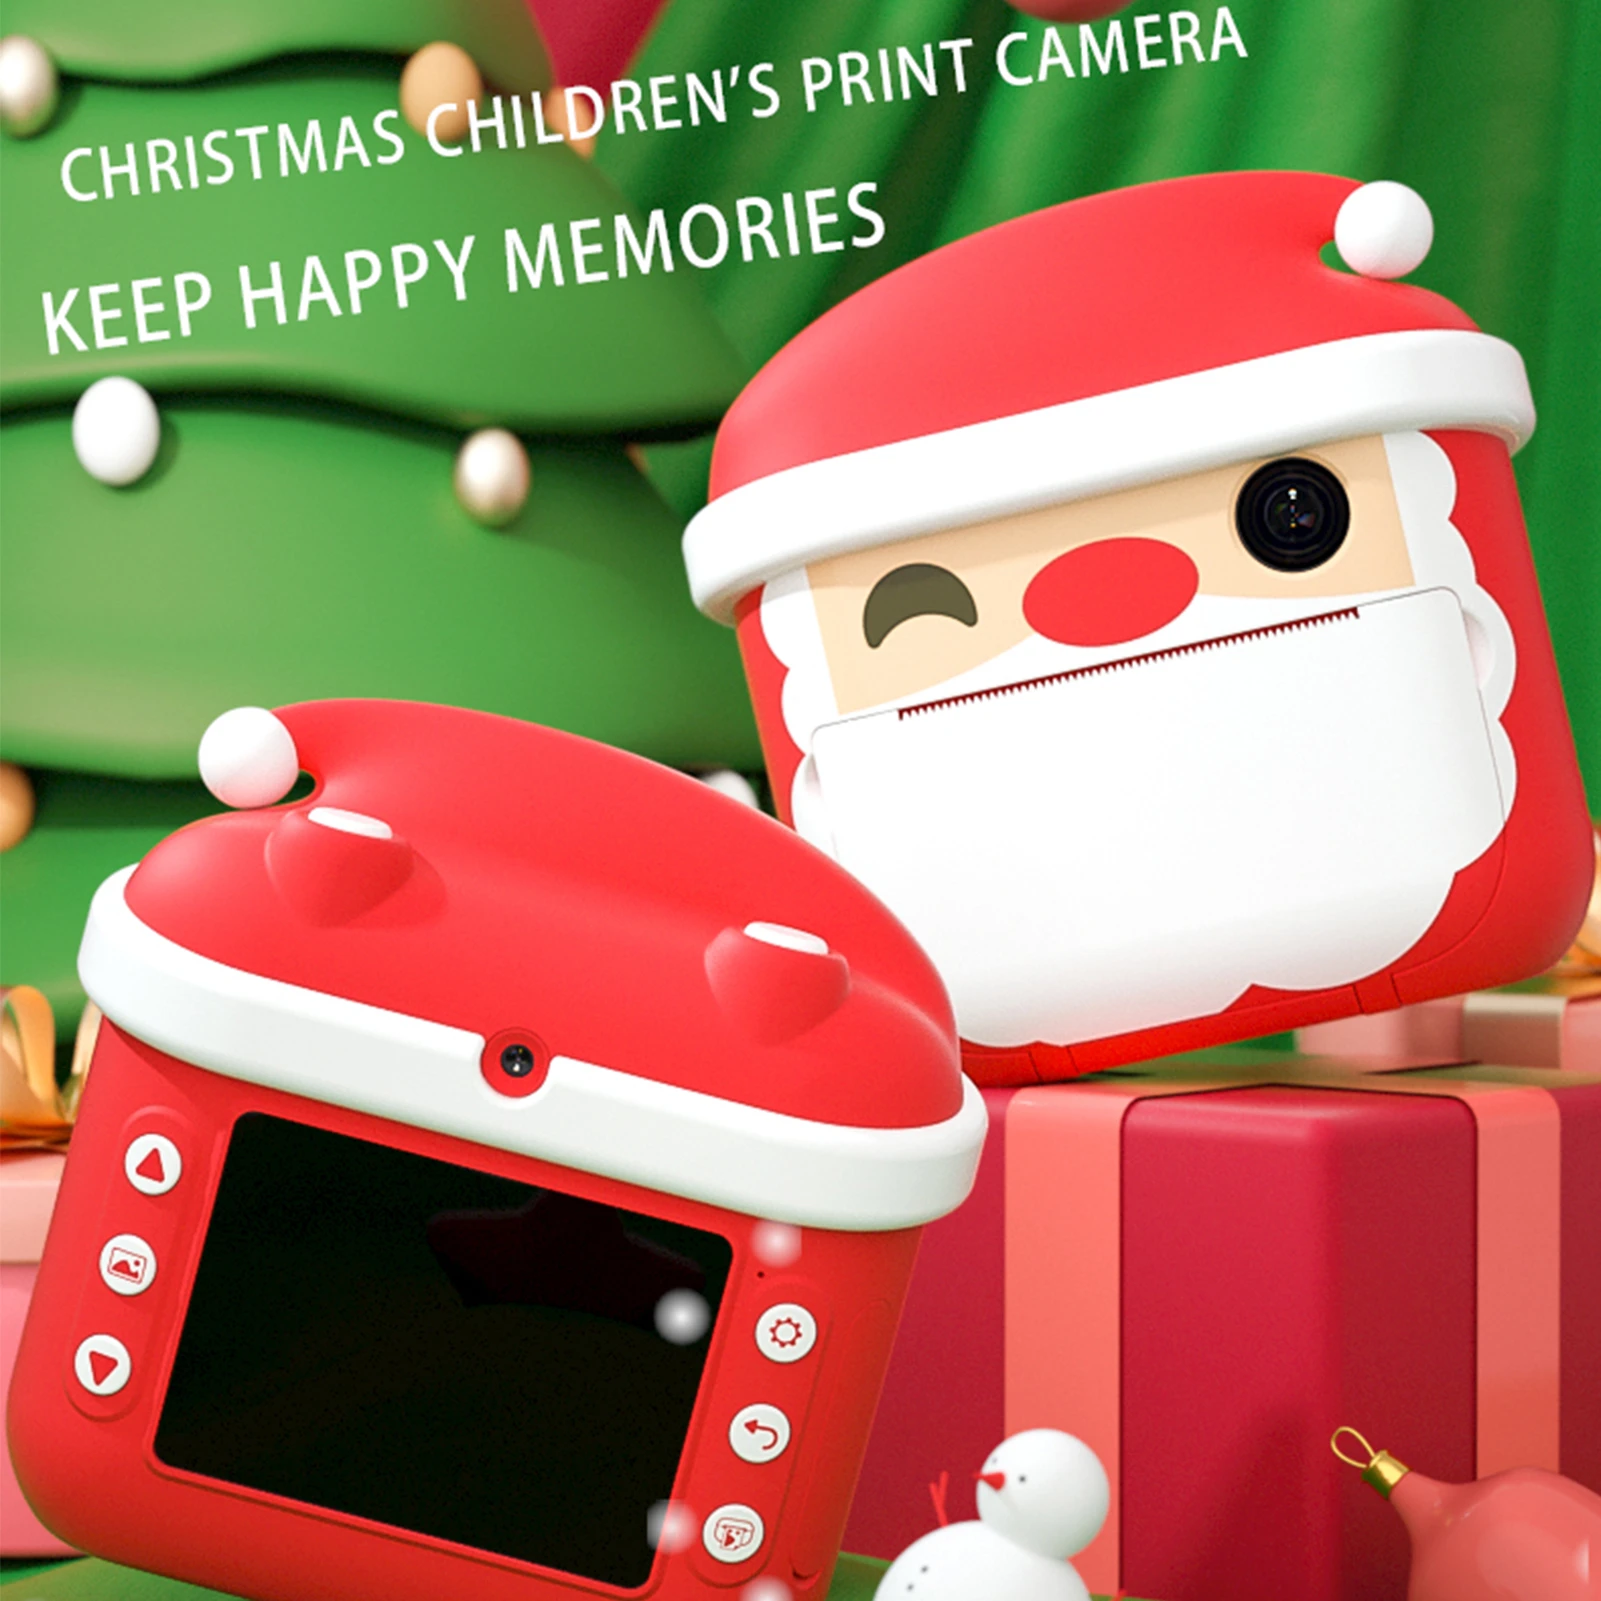 1080P Digital Instant Camera Cute Kids Photo Printer with 12MP Front and Rear Cameras Print Paper for Boys Girls Christmas Gift mirrorless digital camera